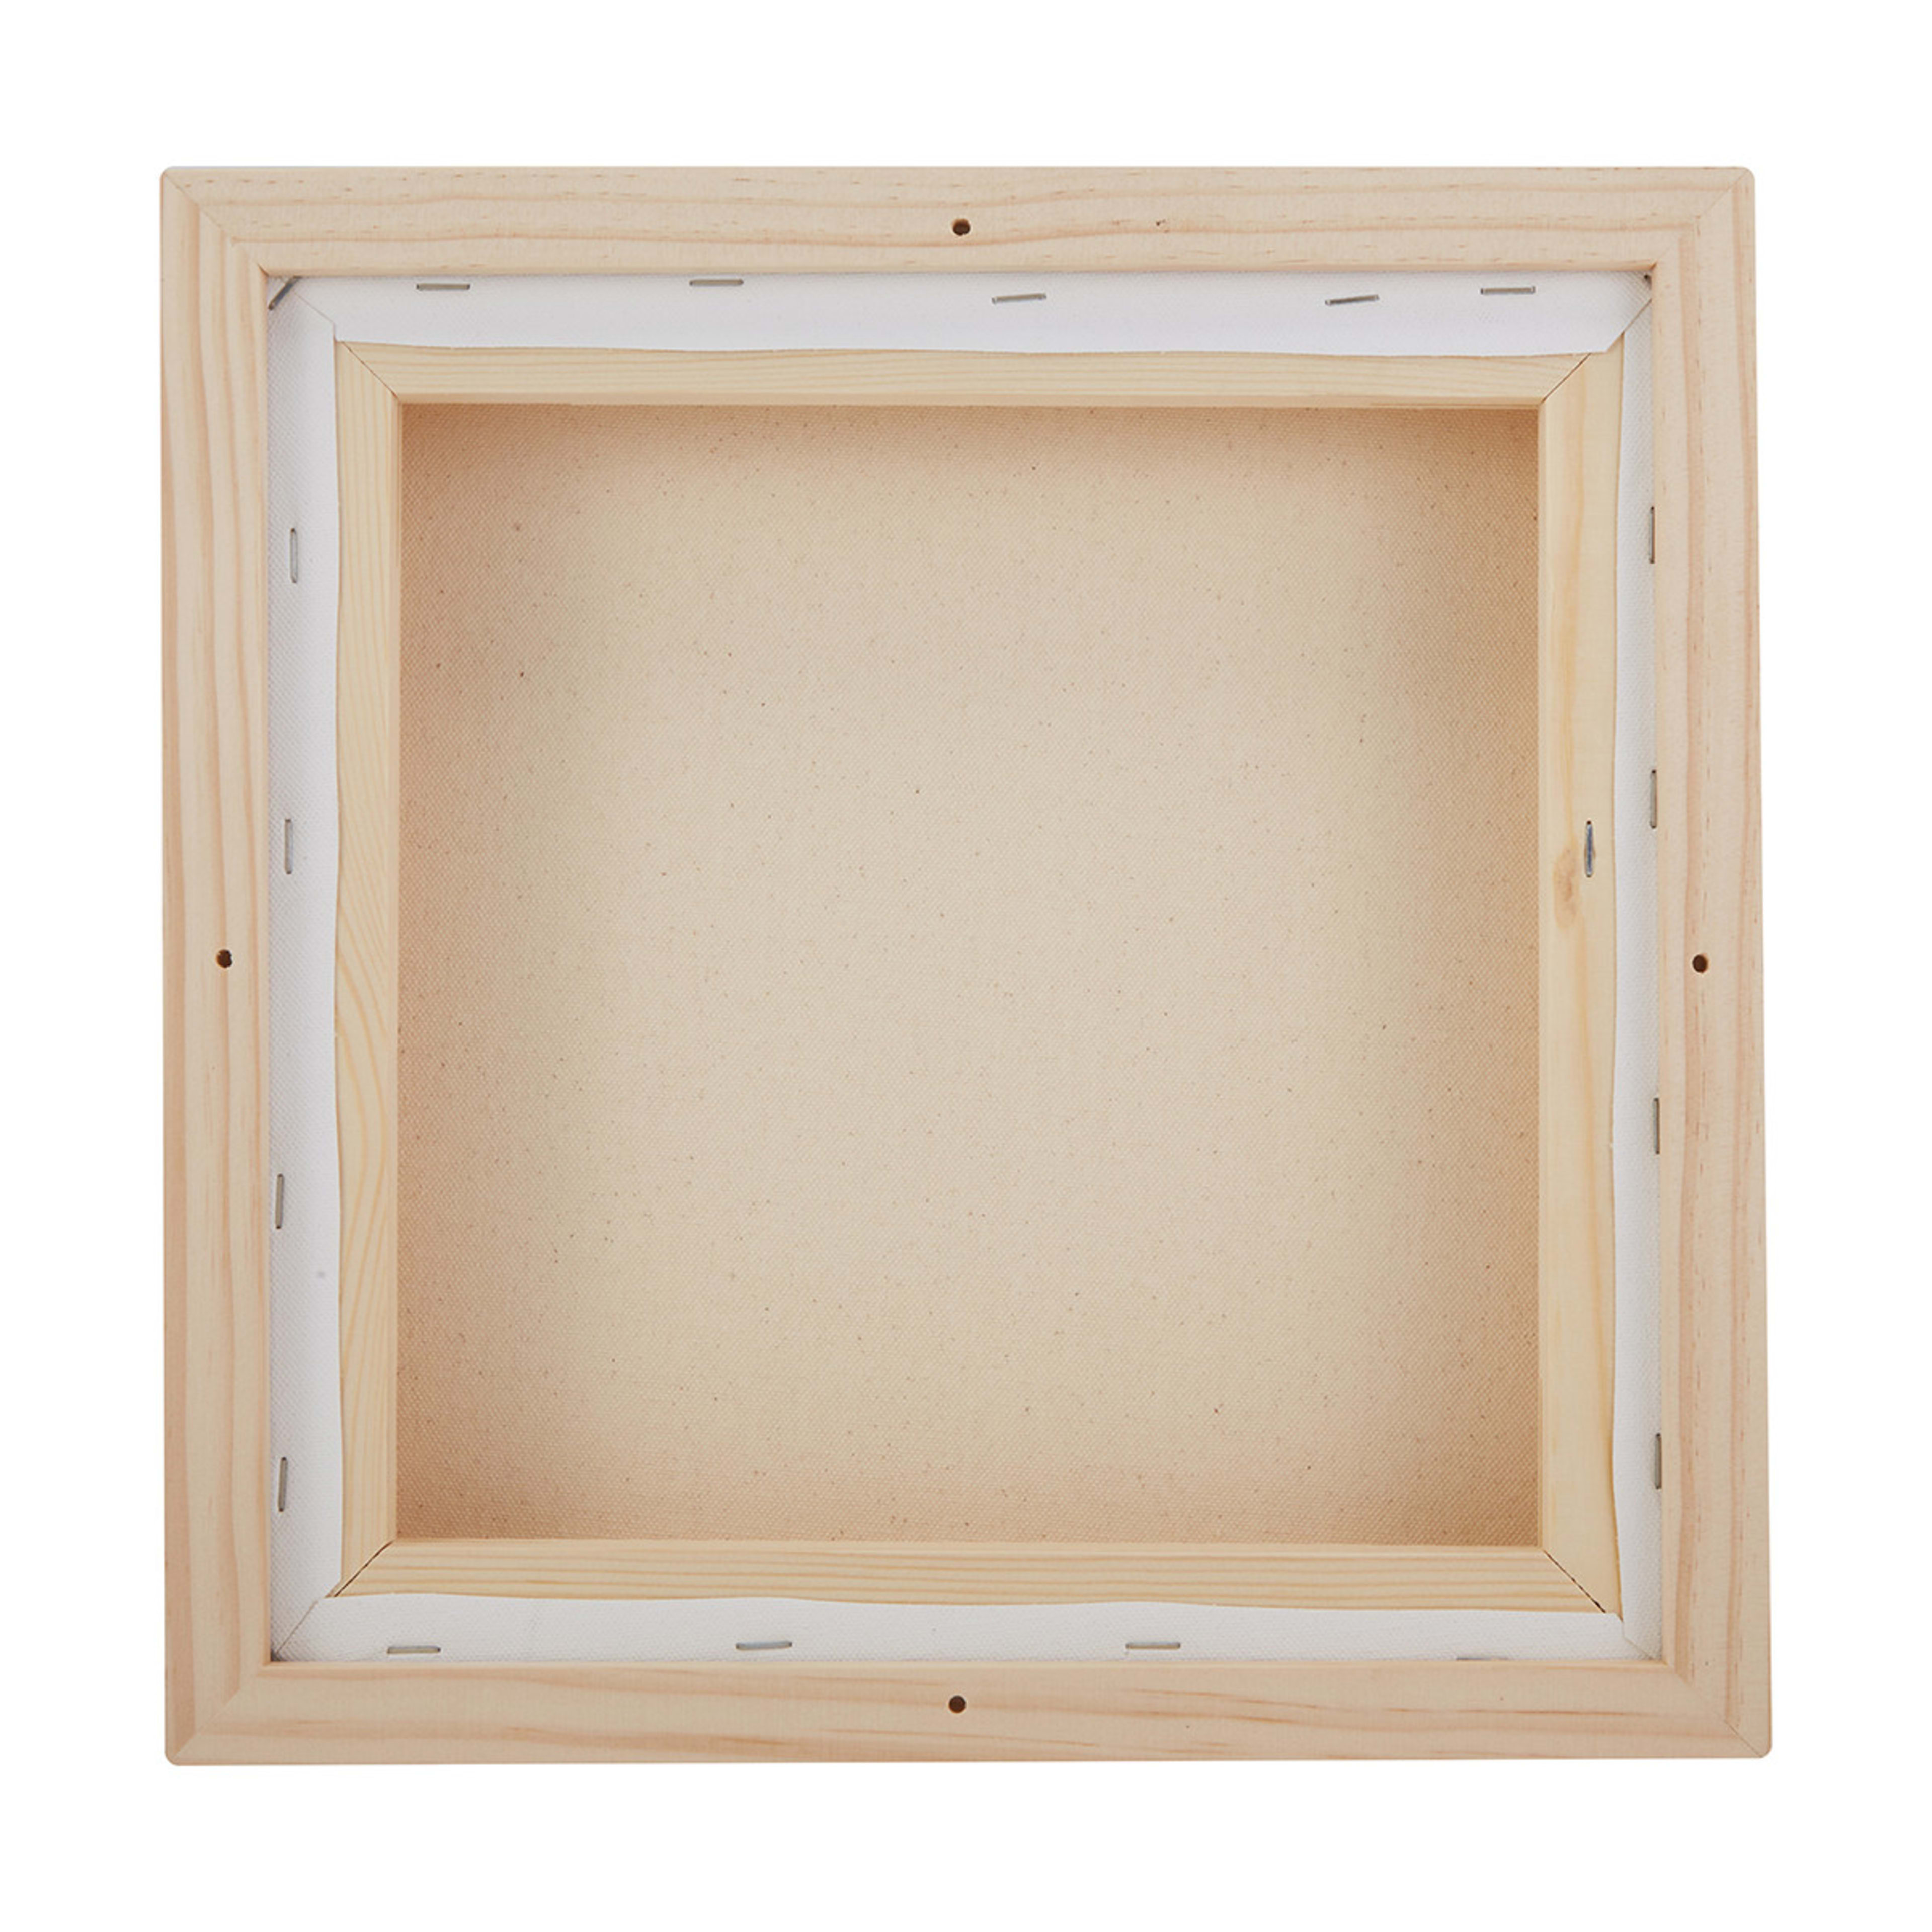 12in. x 12in. Stretched Canvas with Wood Frame - Kmart NZ